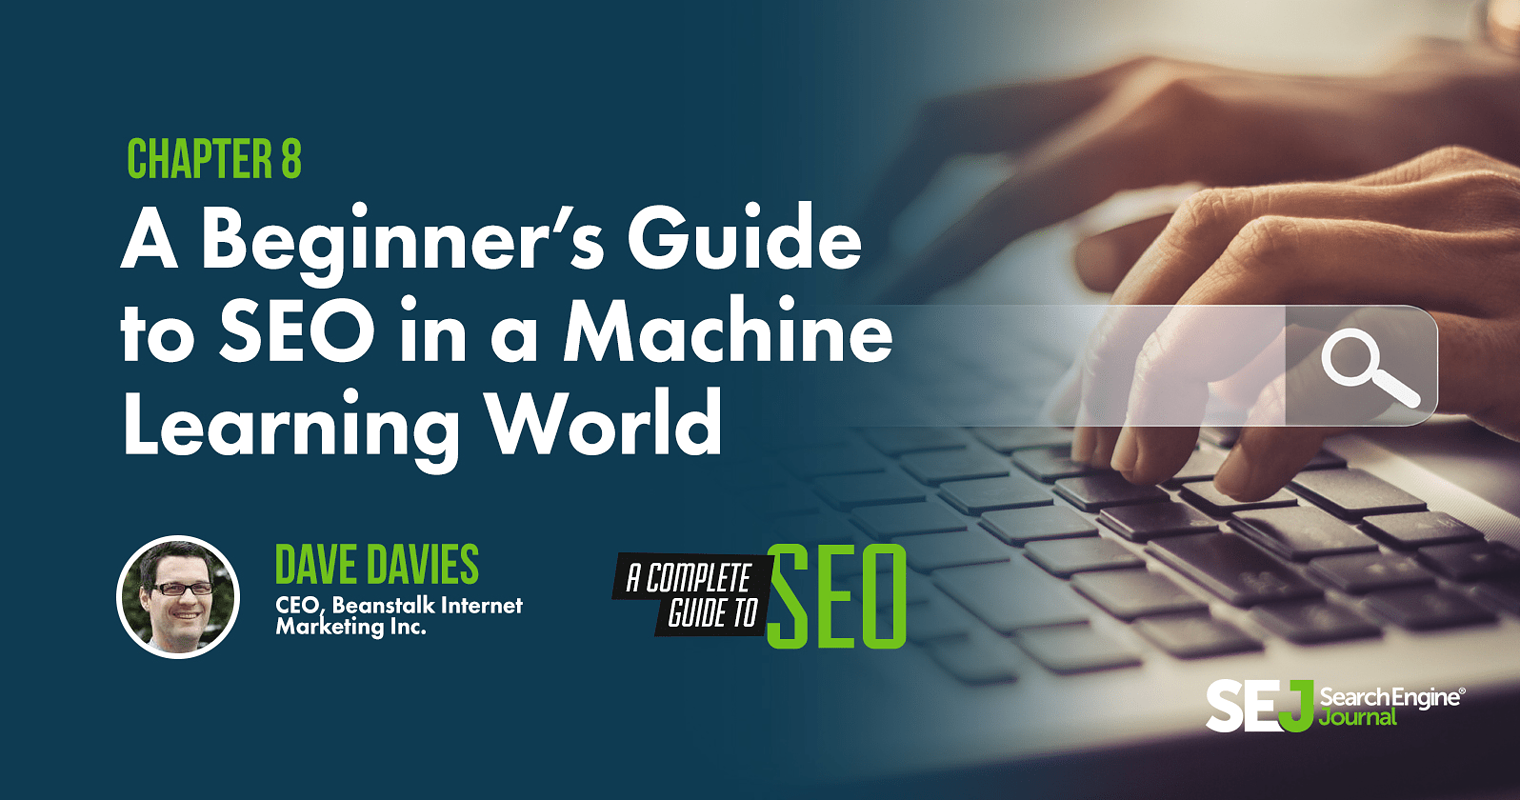 A Beginner’s Guide to SEO in a Machine Learning World